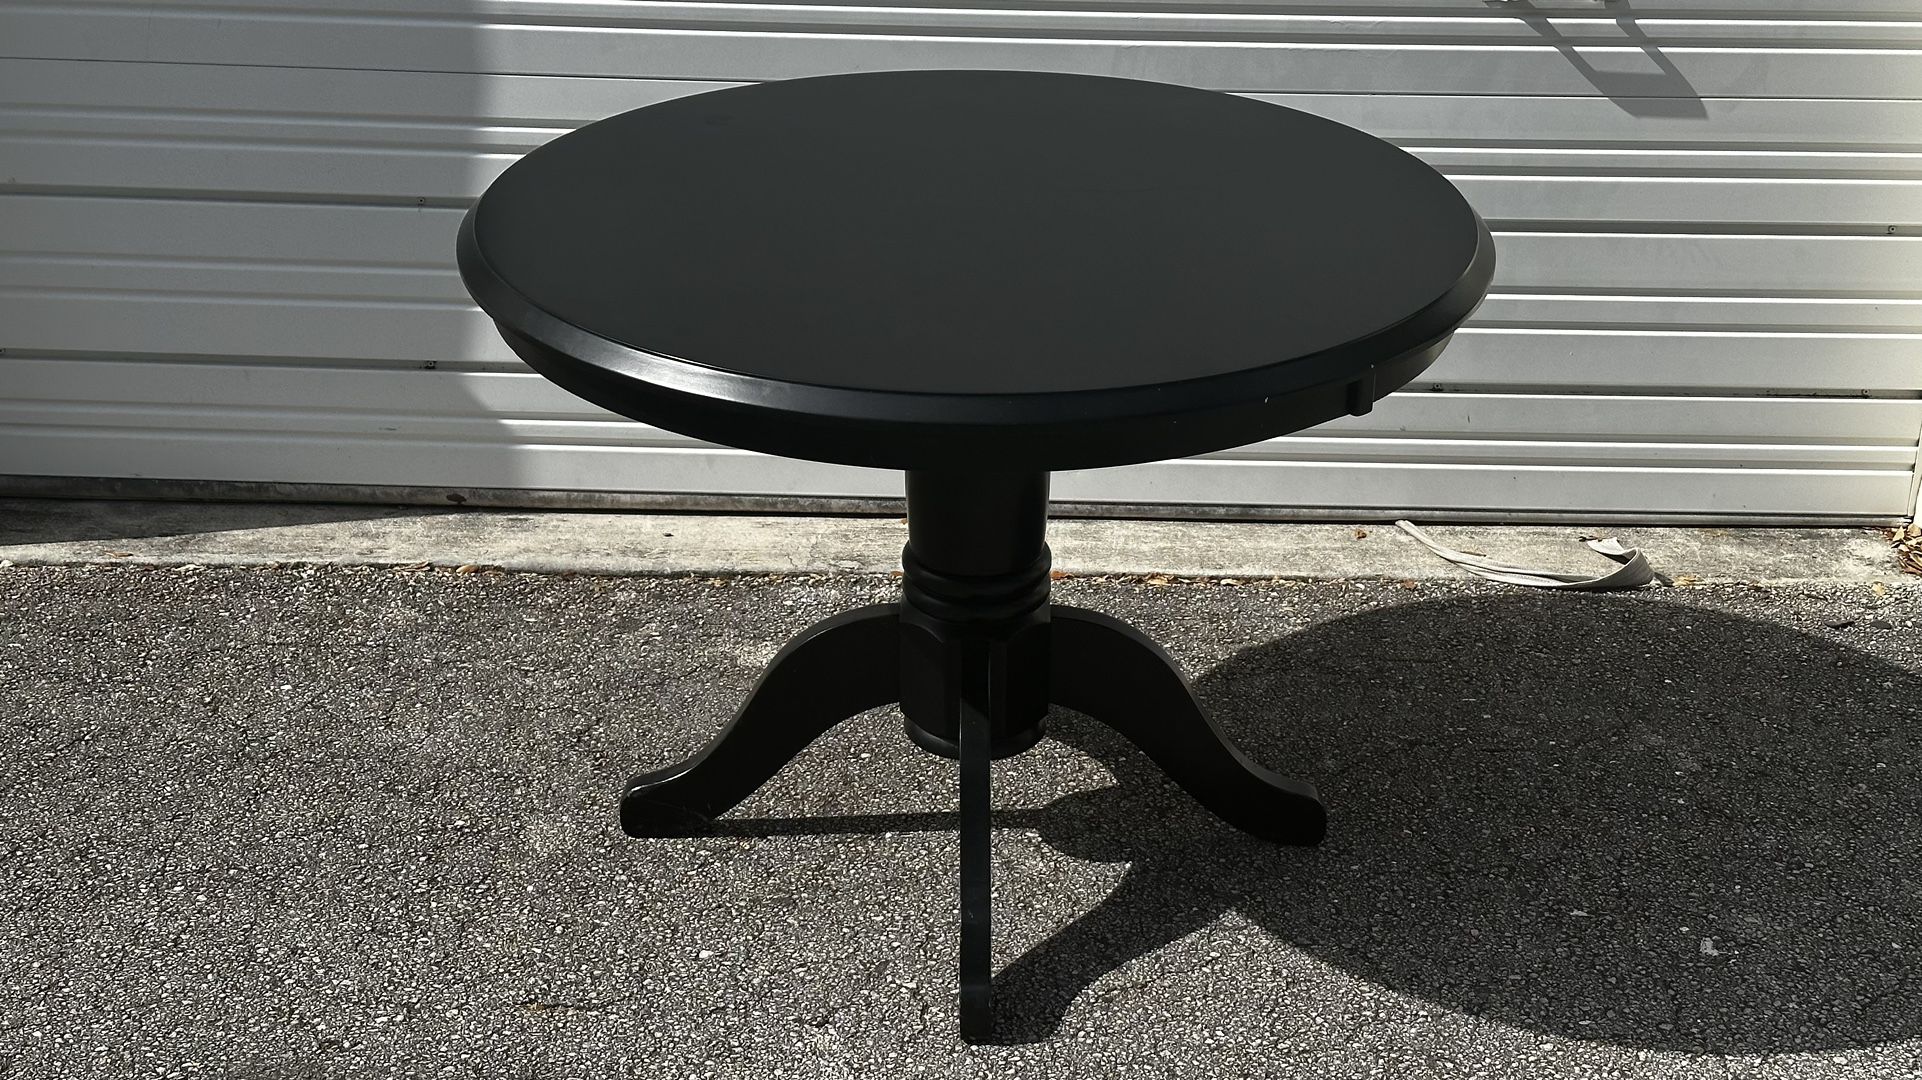 ROUND DINING / KITCHEN TABLE IN EXCELLENT CONDITION - delivery is negotiable